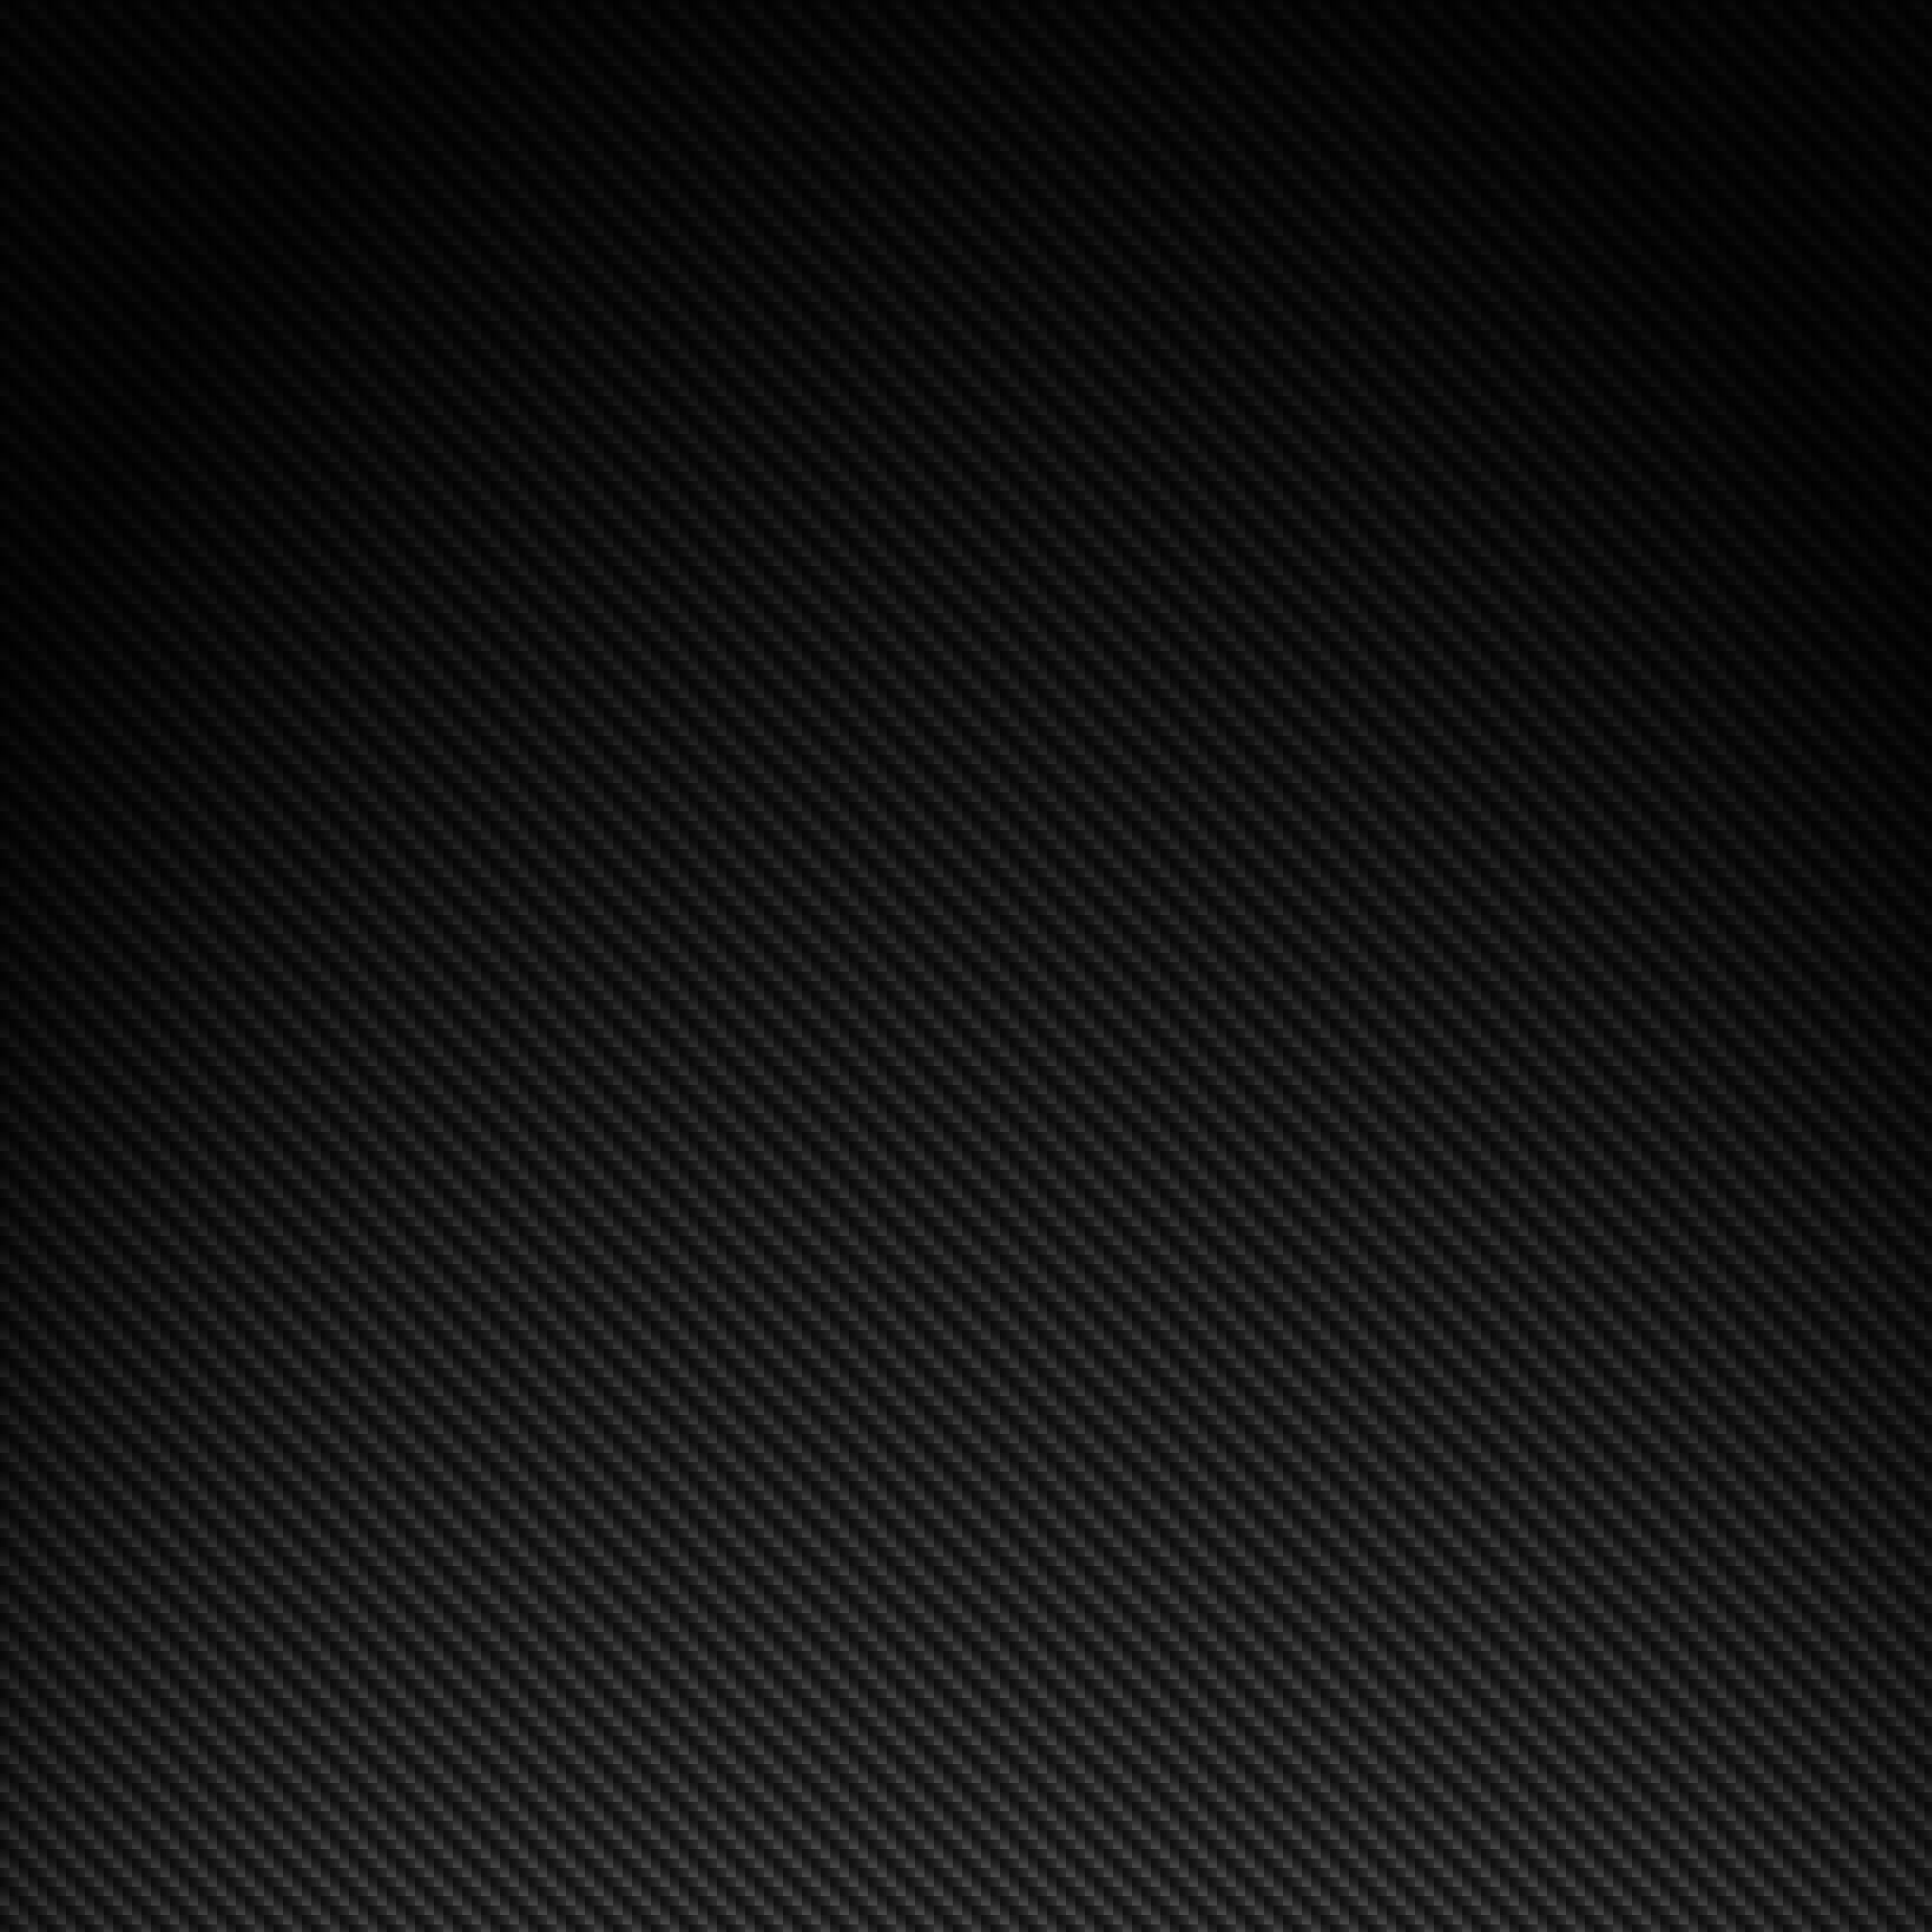 FREE High Resolution Carbon Fiber Wallpapers For New iPad